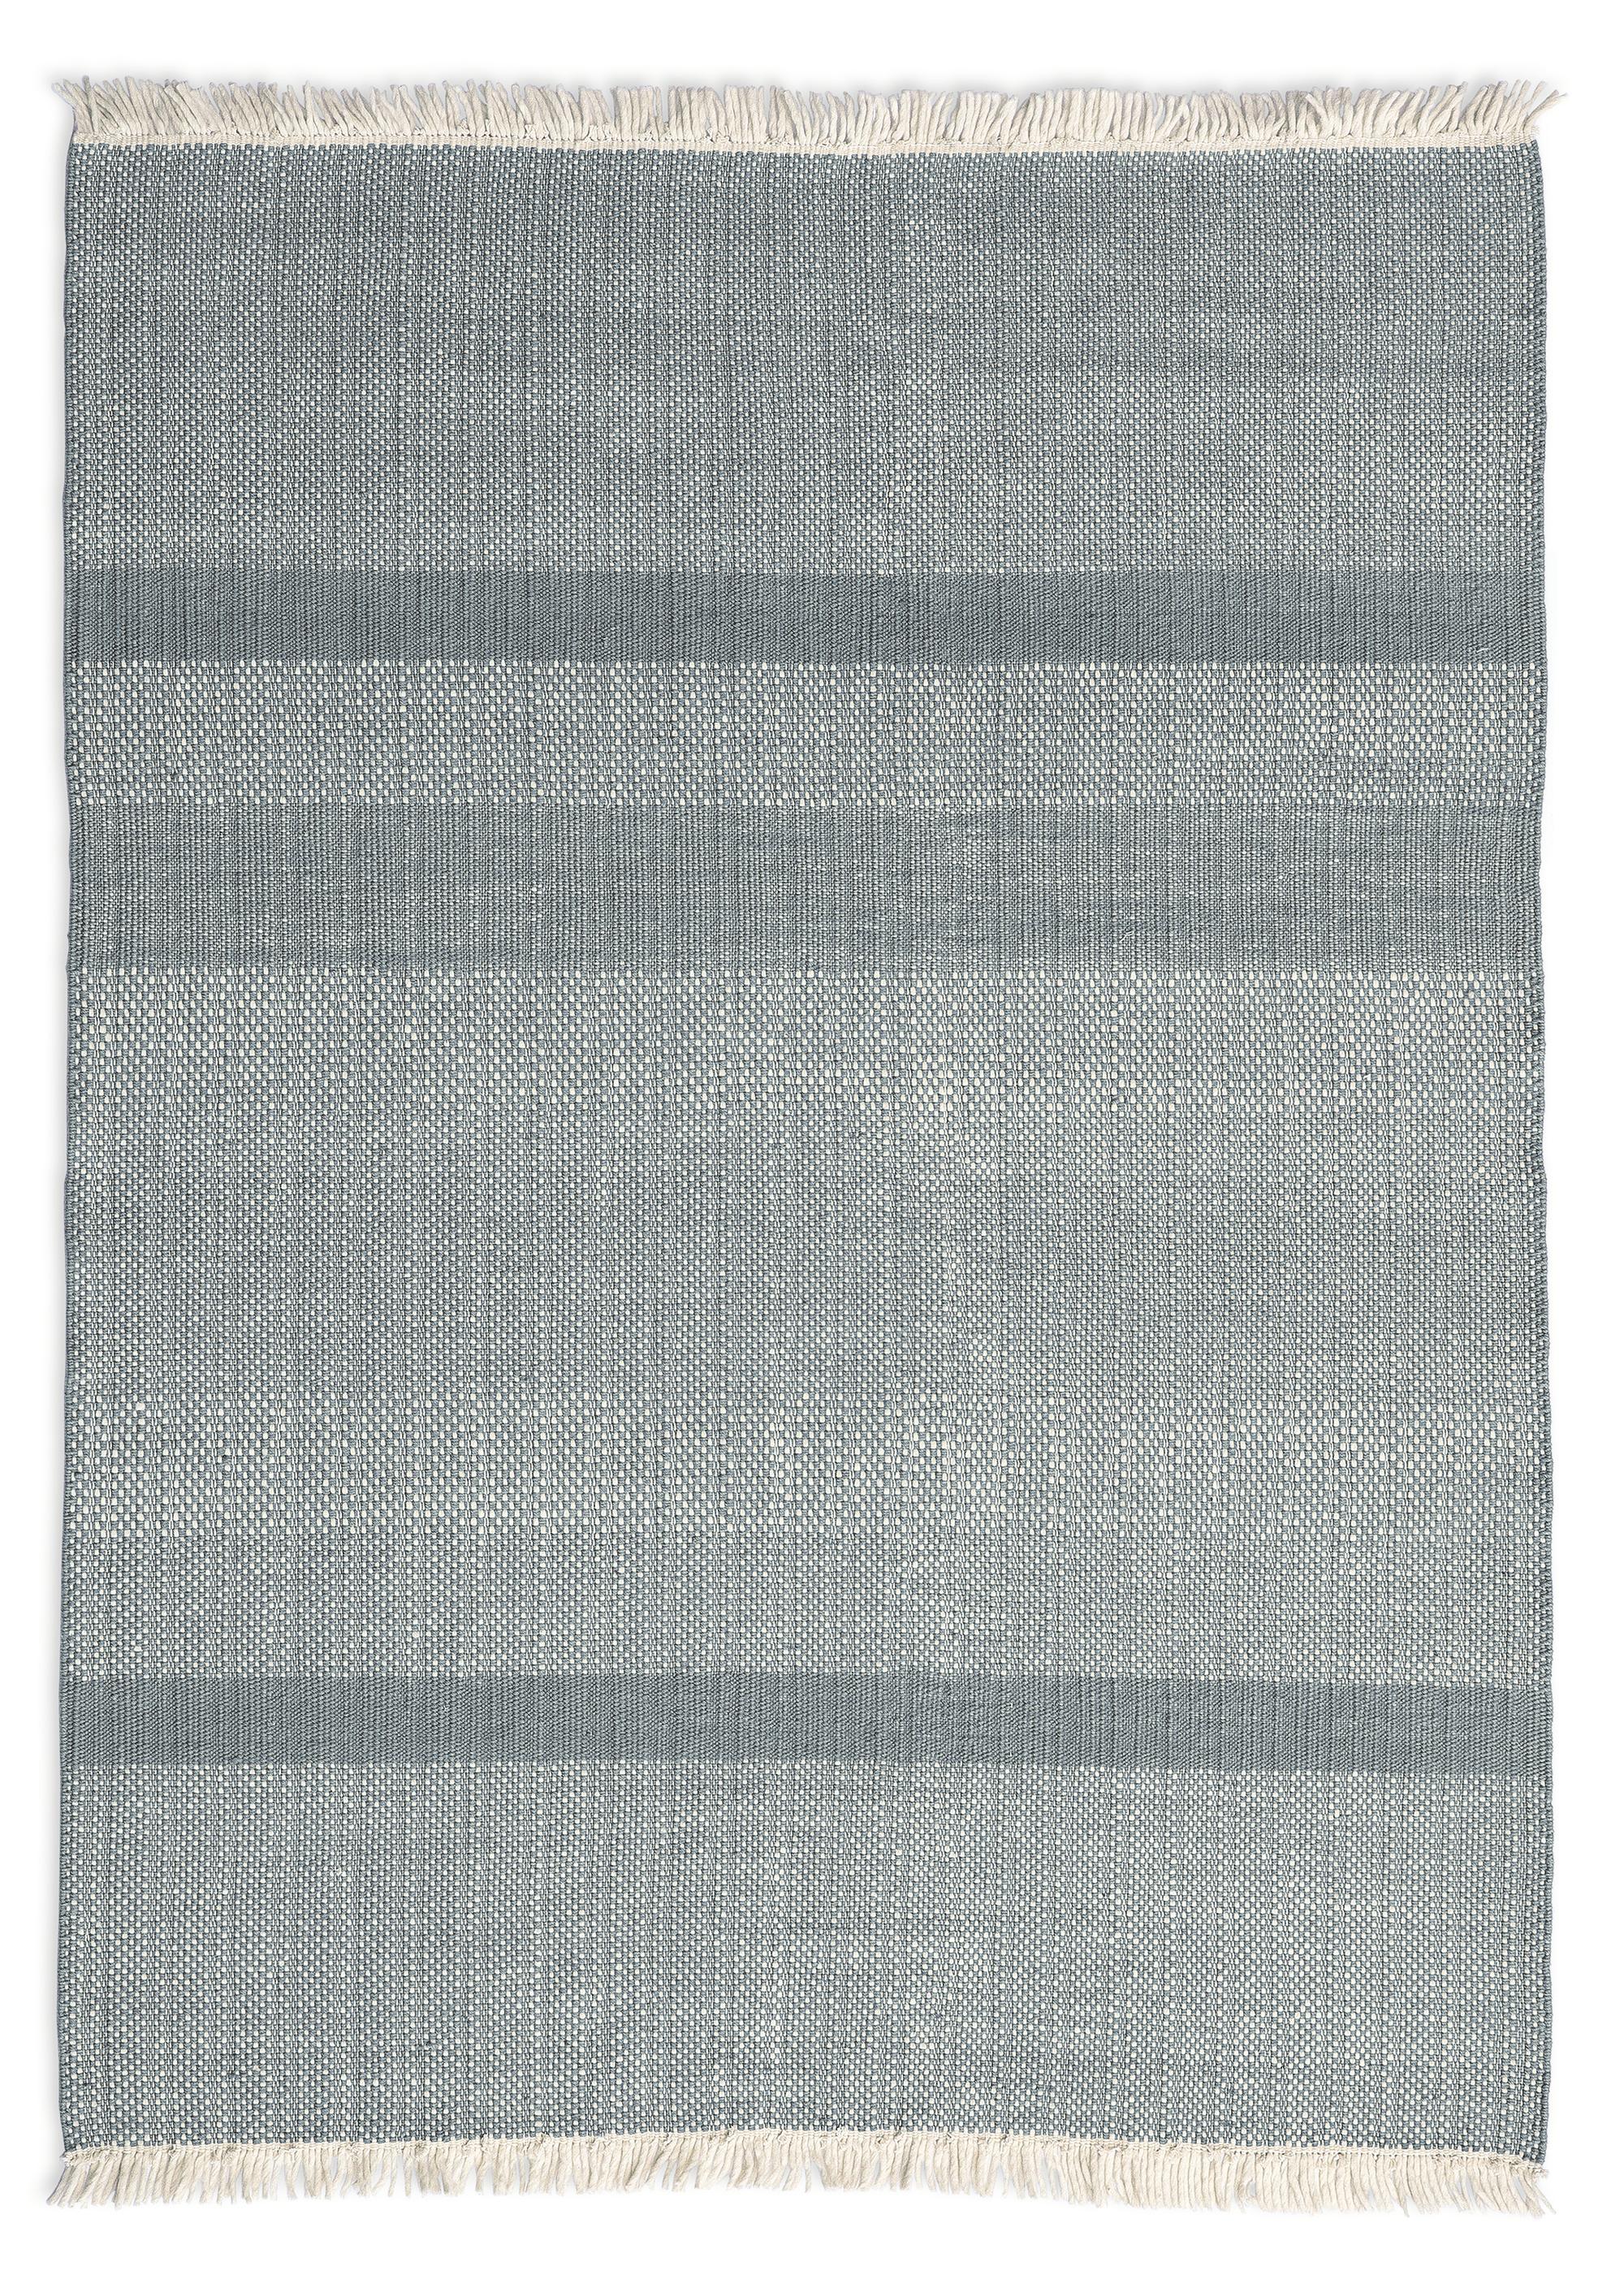 Large 'Tres Texture' Hand-Loomed Rug for Nanimarquina For Sale 4